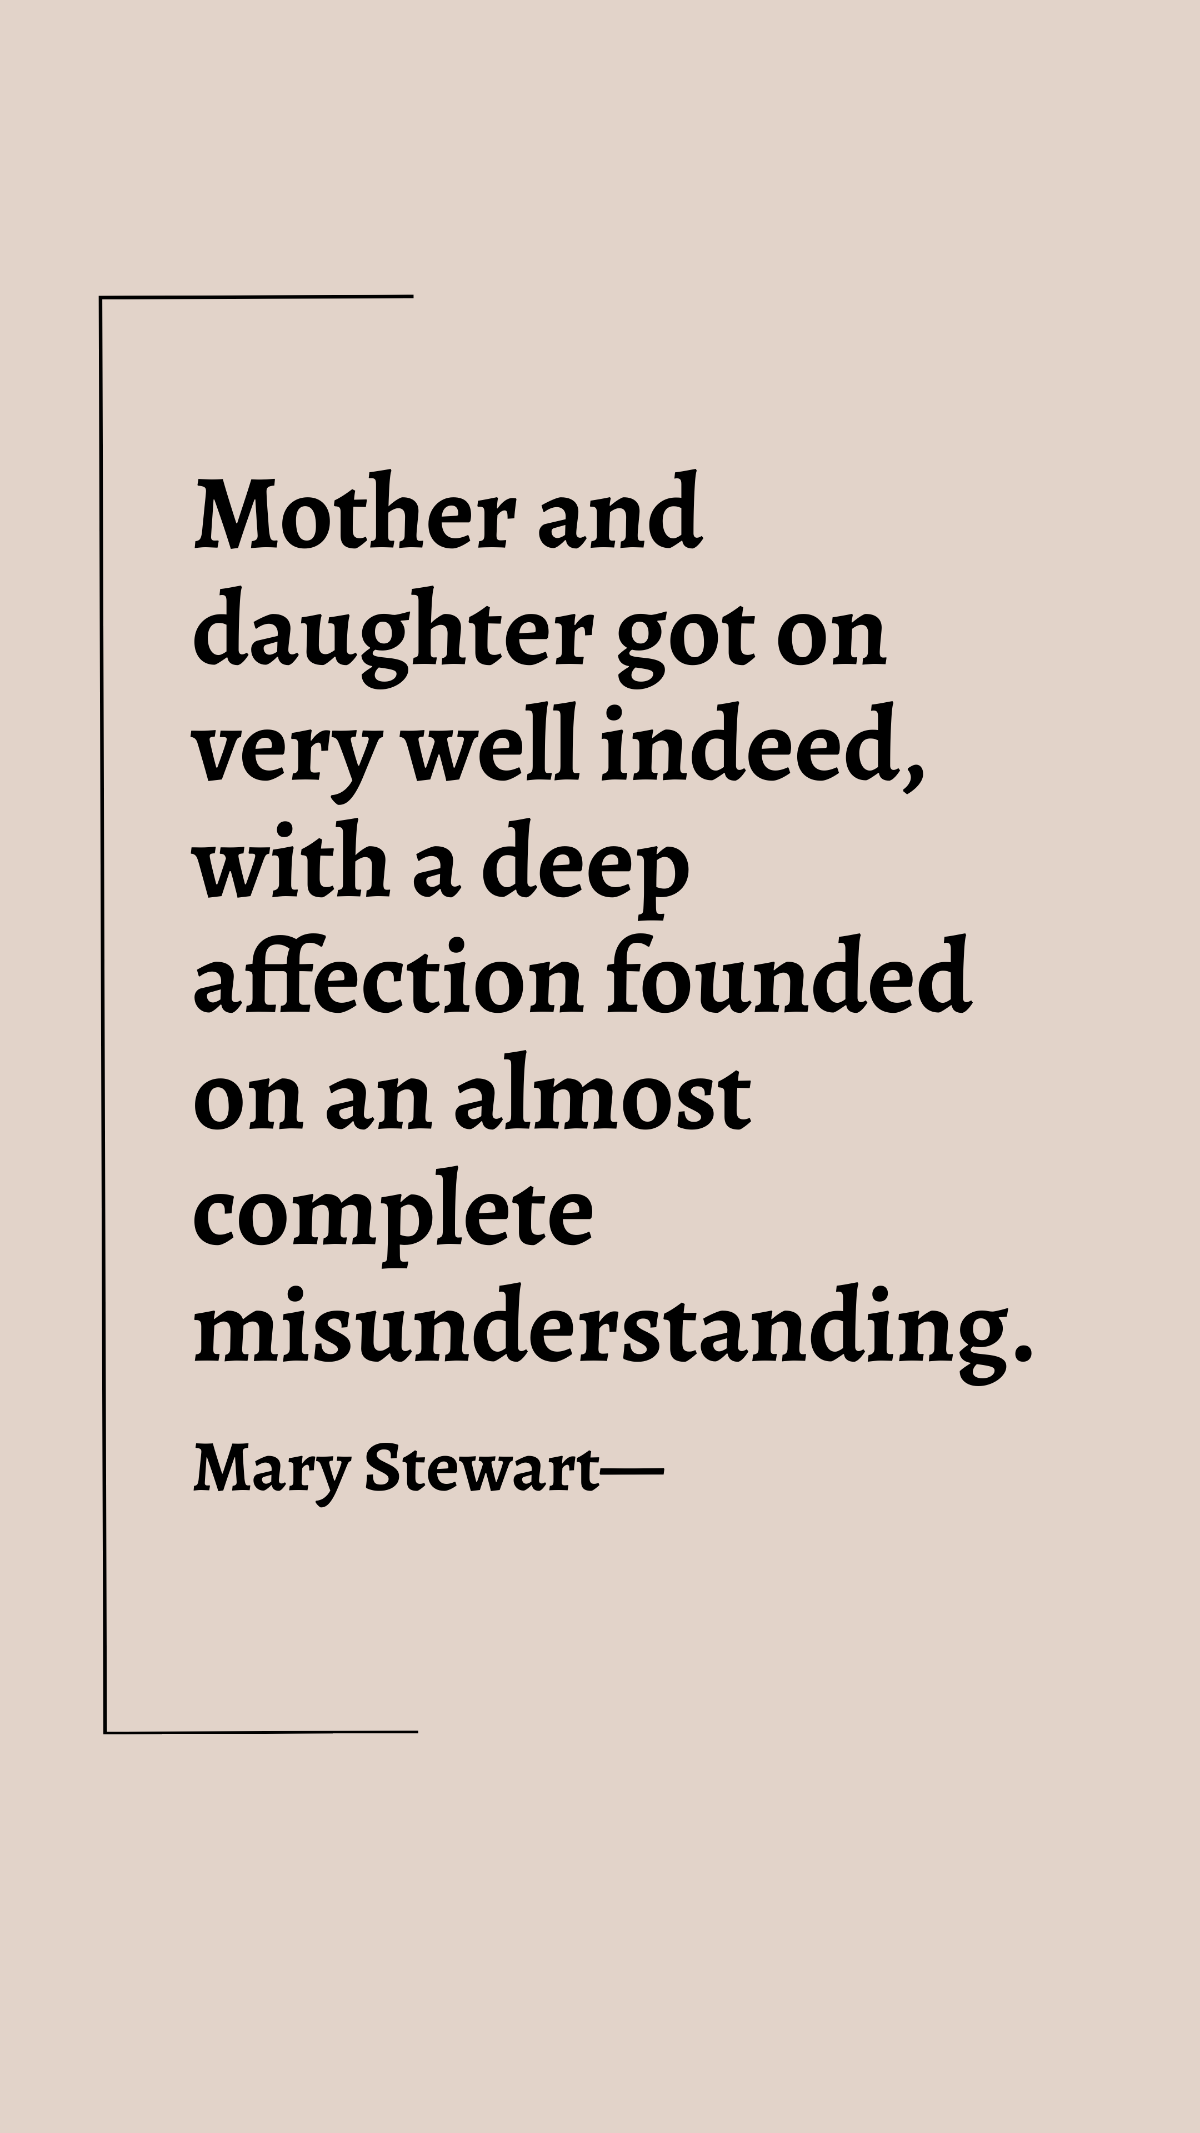 Mary Stewart - Mother and daughter got on very well indeed, with a deep affection founded on an almost complete misunderstanding. Template